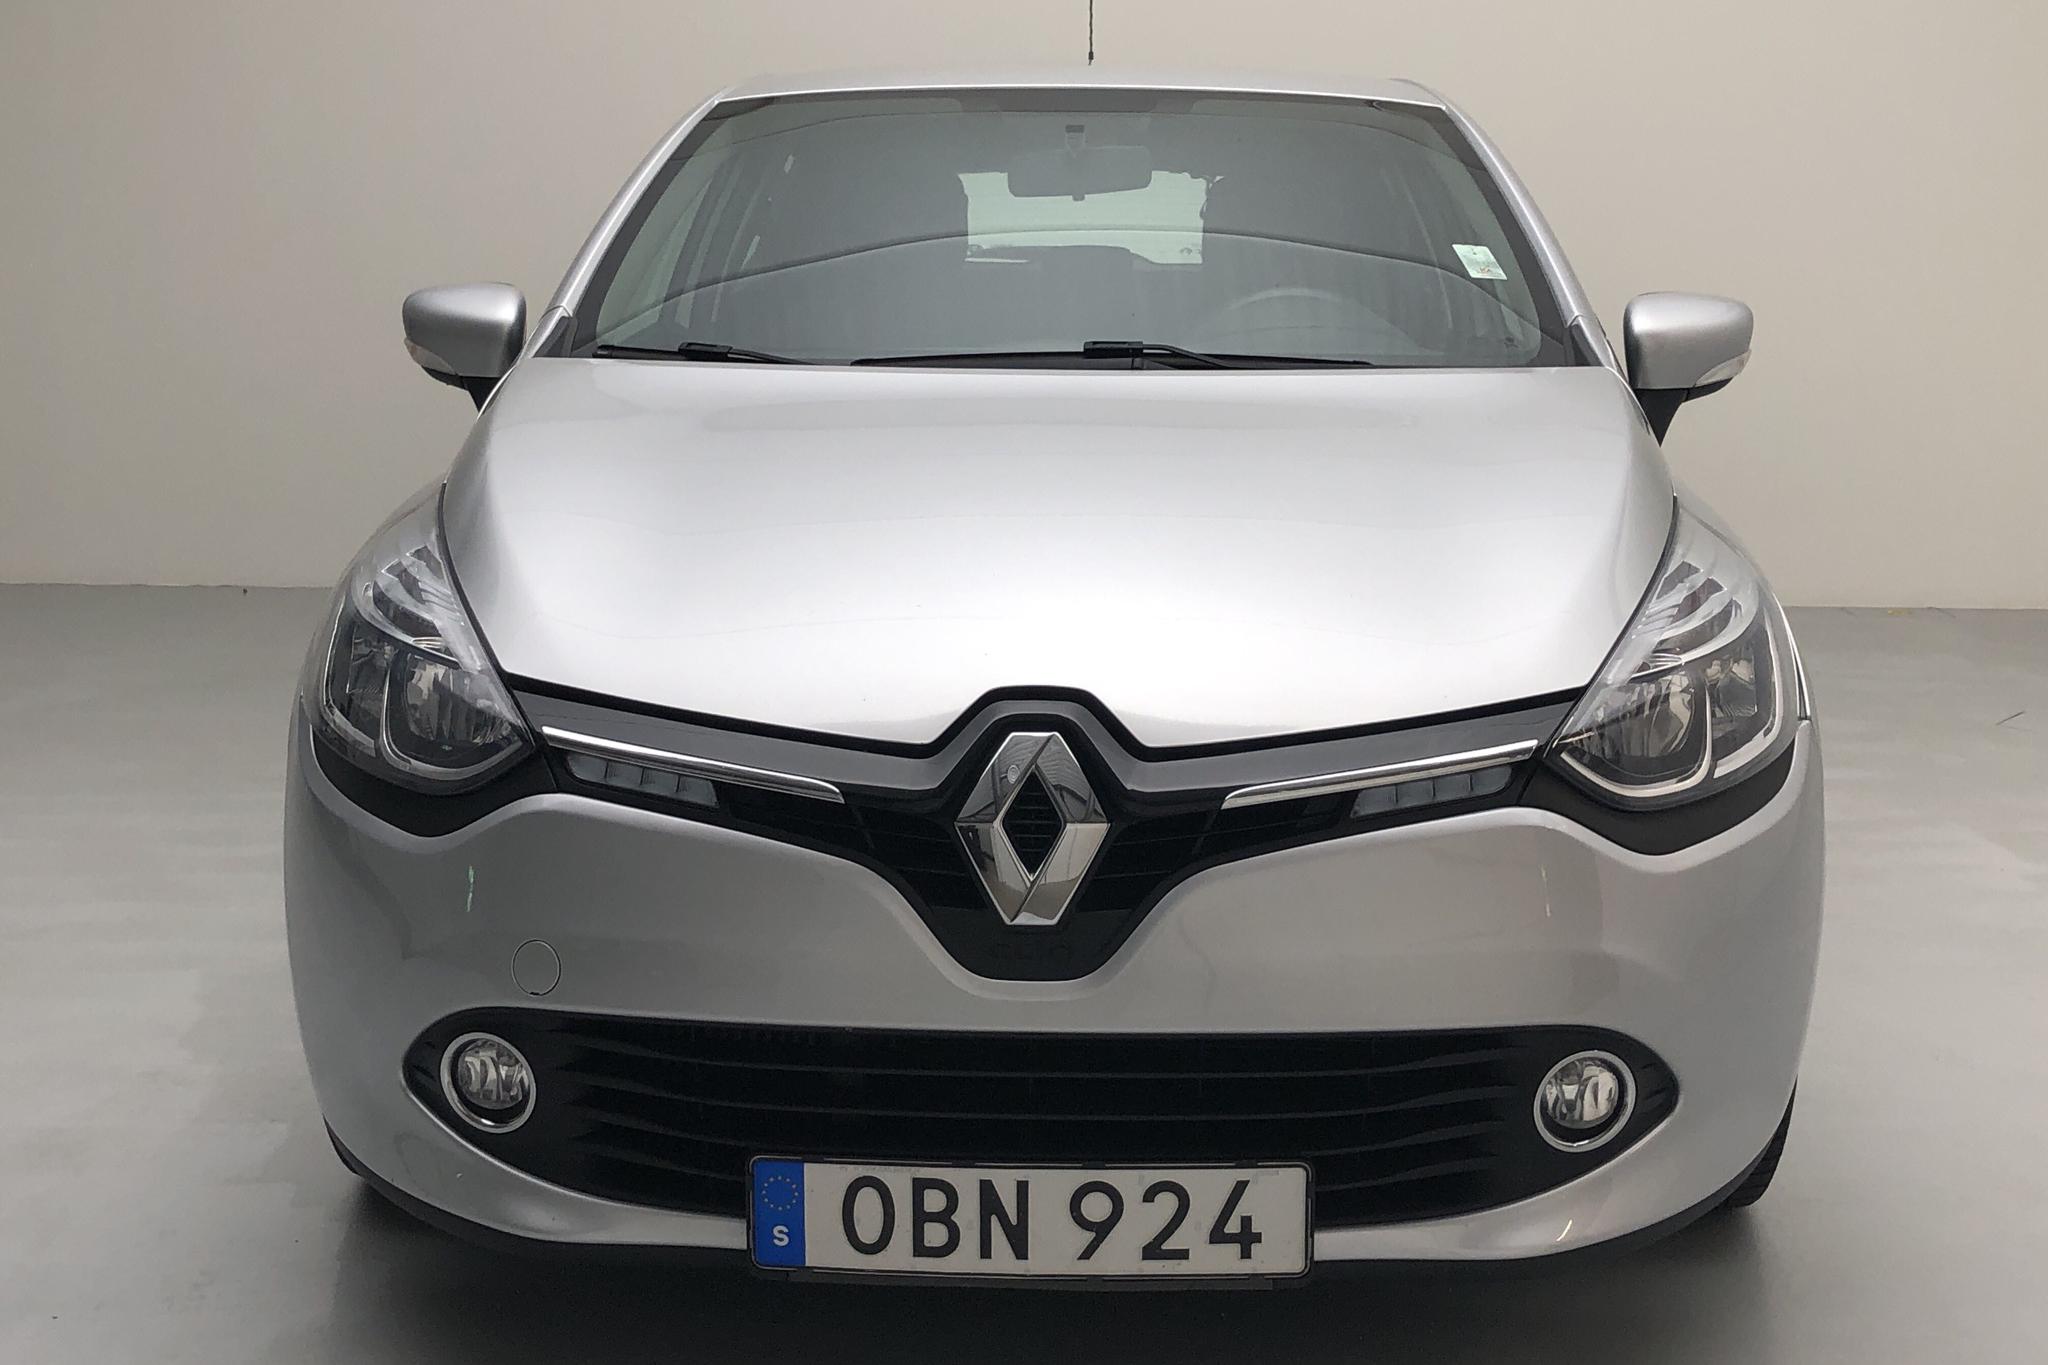 Renault Clio IV 1.5 dCi 5dr (90hk) - 12 285 mil - Manuell - silver - 2016